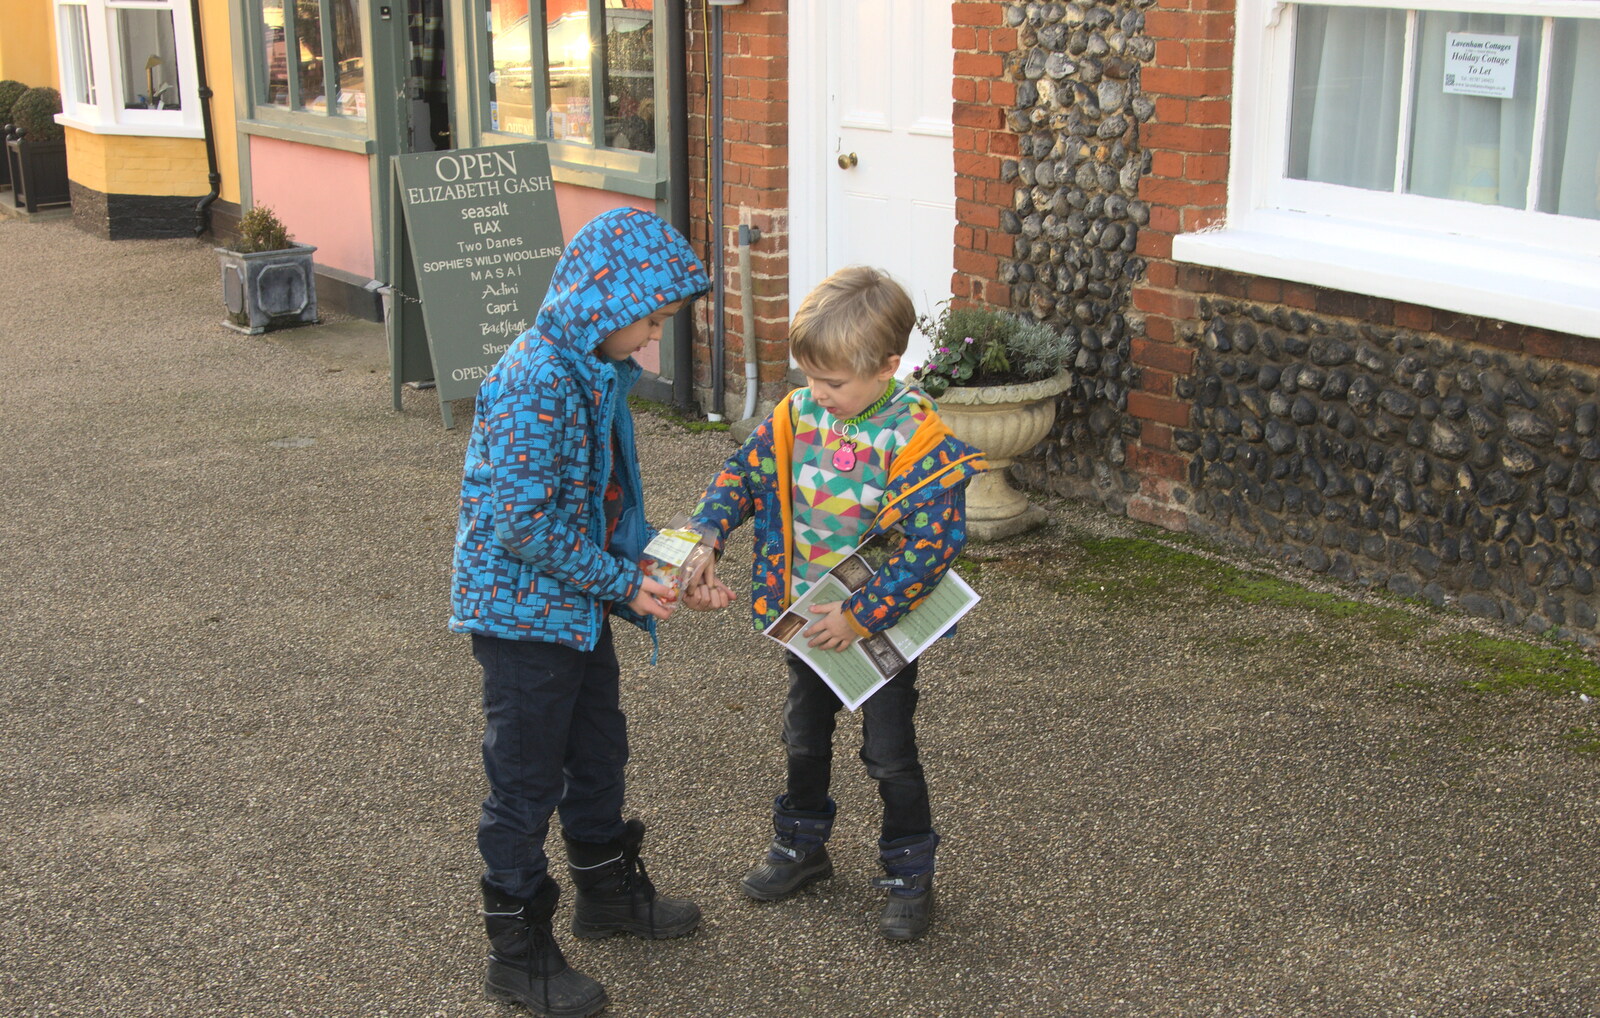 Fred and Harry swap sweets from A Day in Lavenham, Suffolk - 22nd January 2017